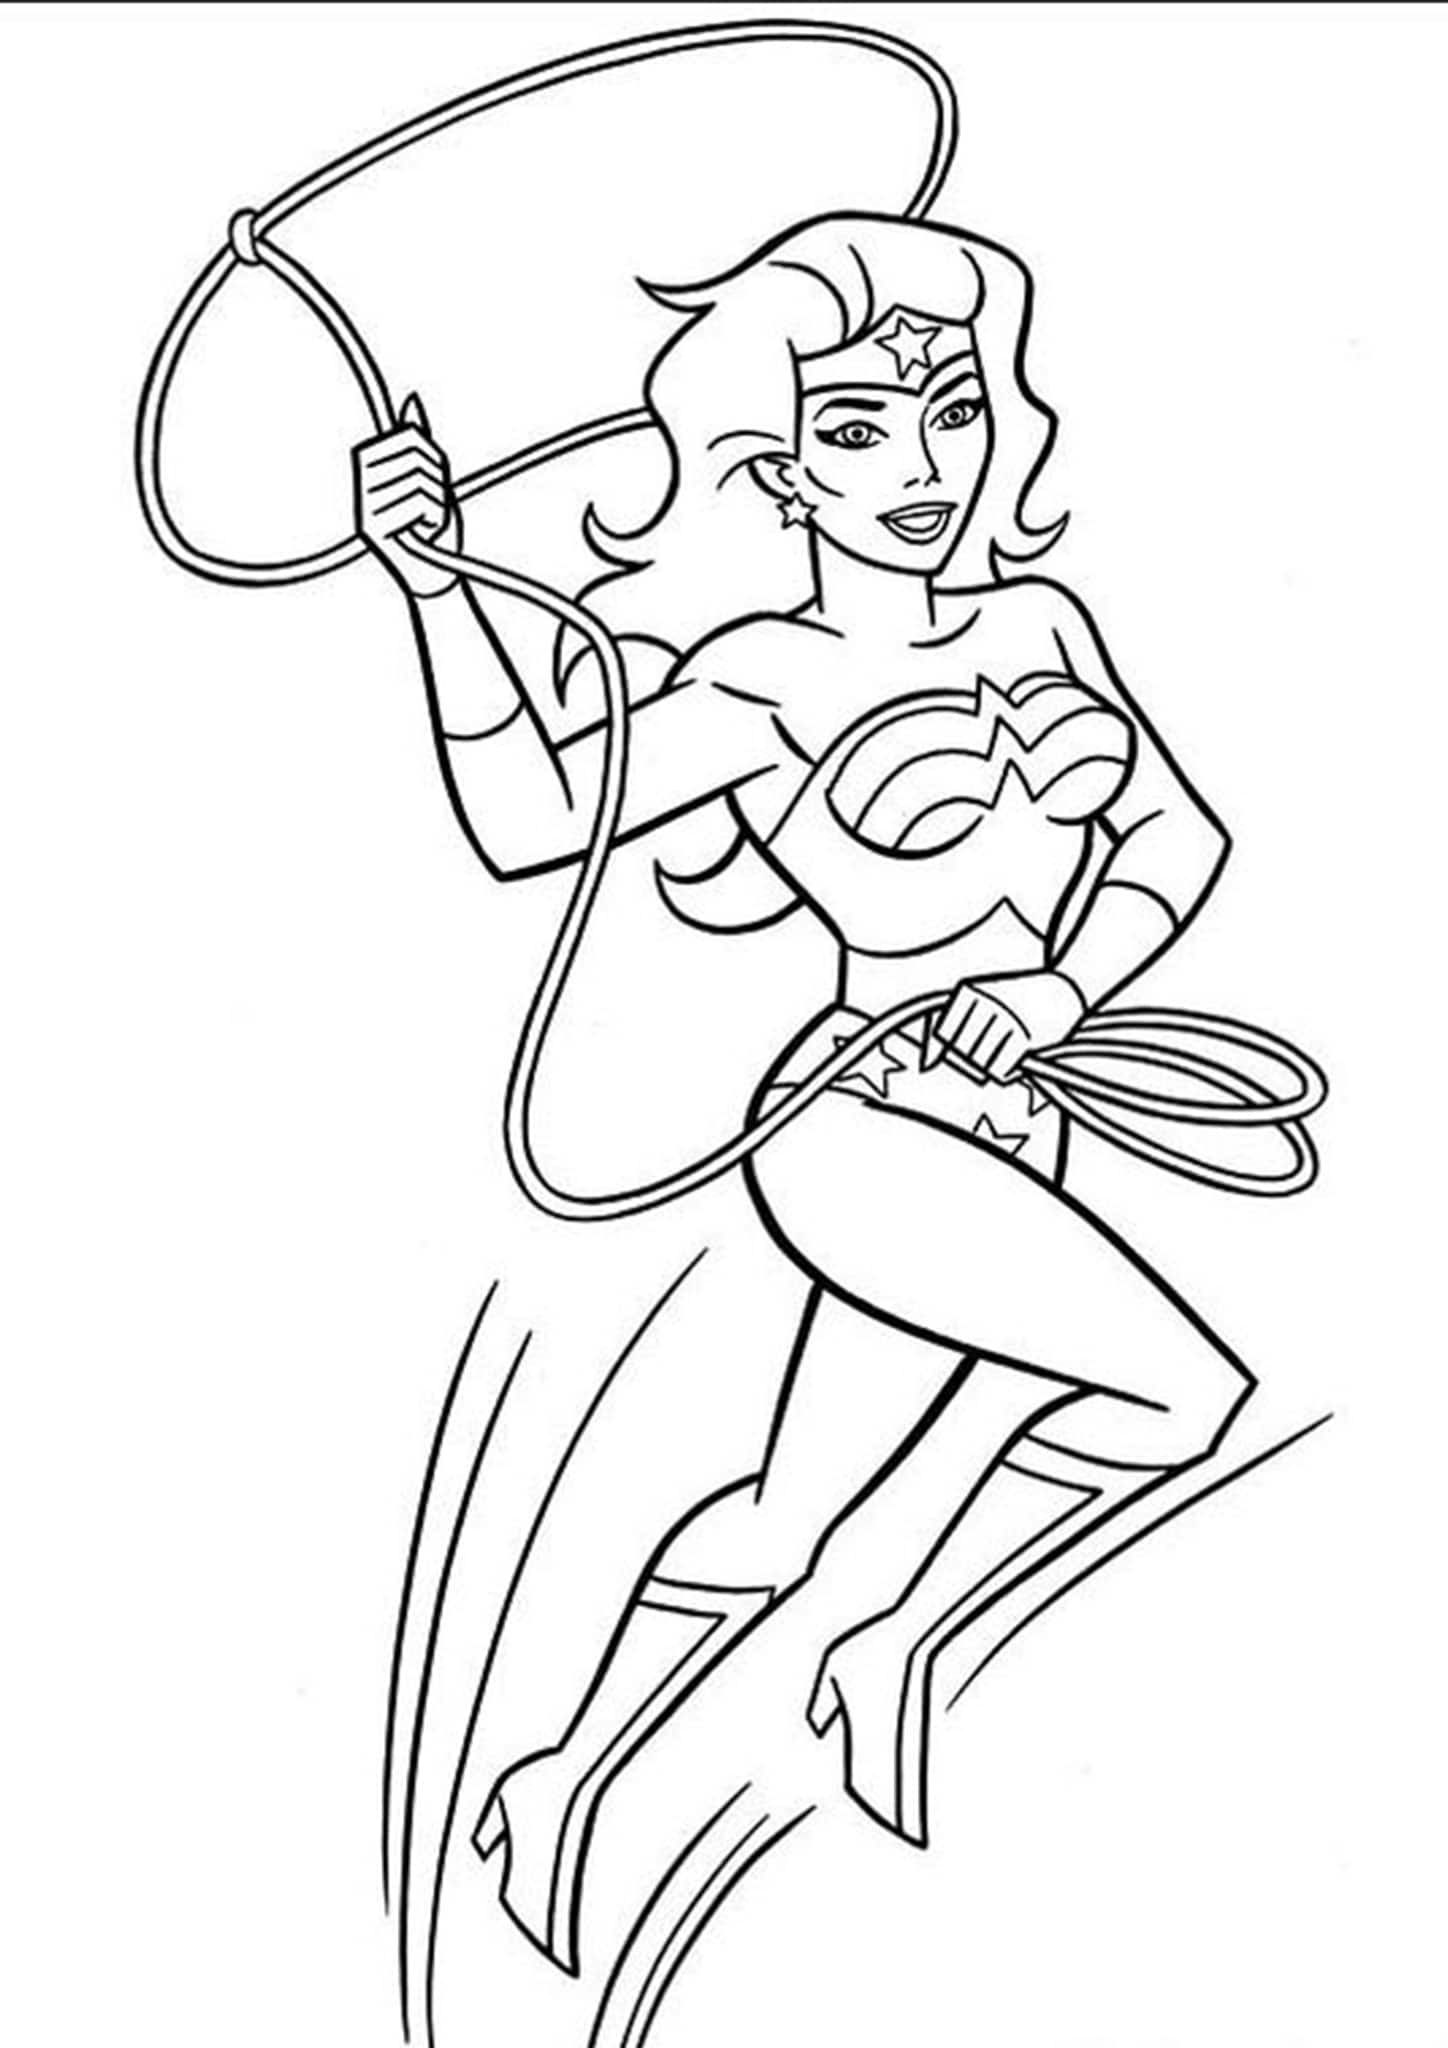 Free easy to print wonder woman coloring pages superhero coloring pages coloring pages poppy coloring page